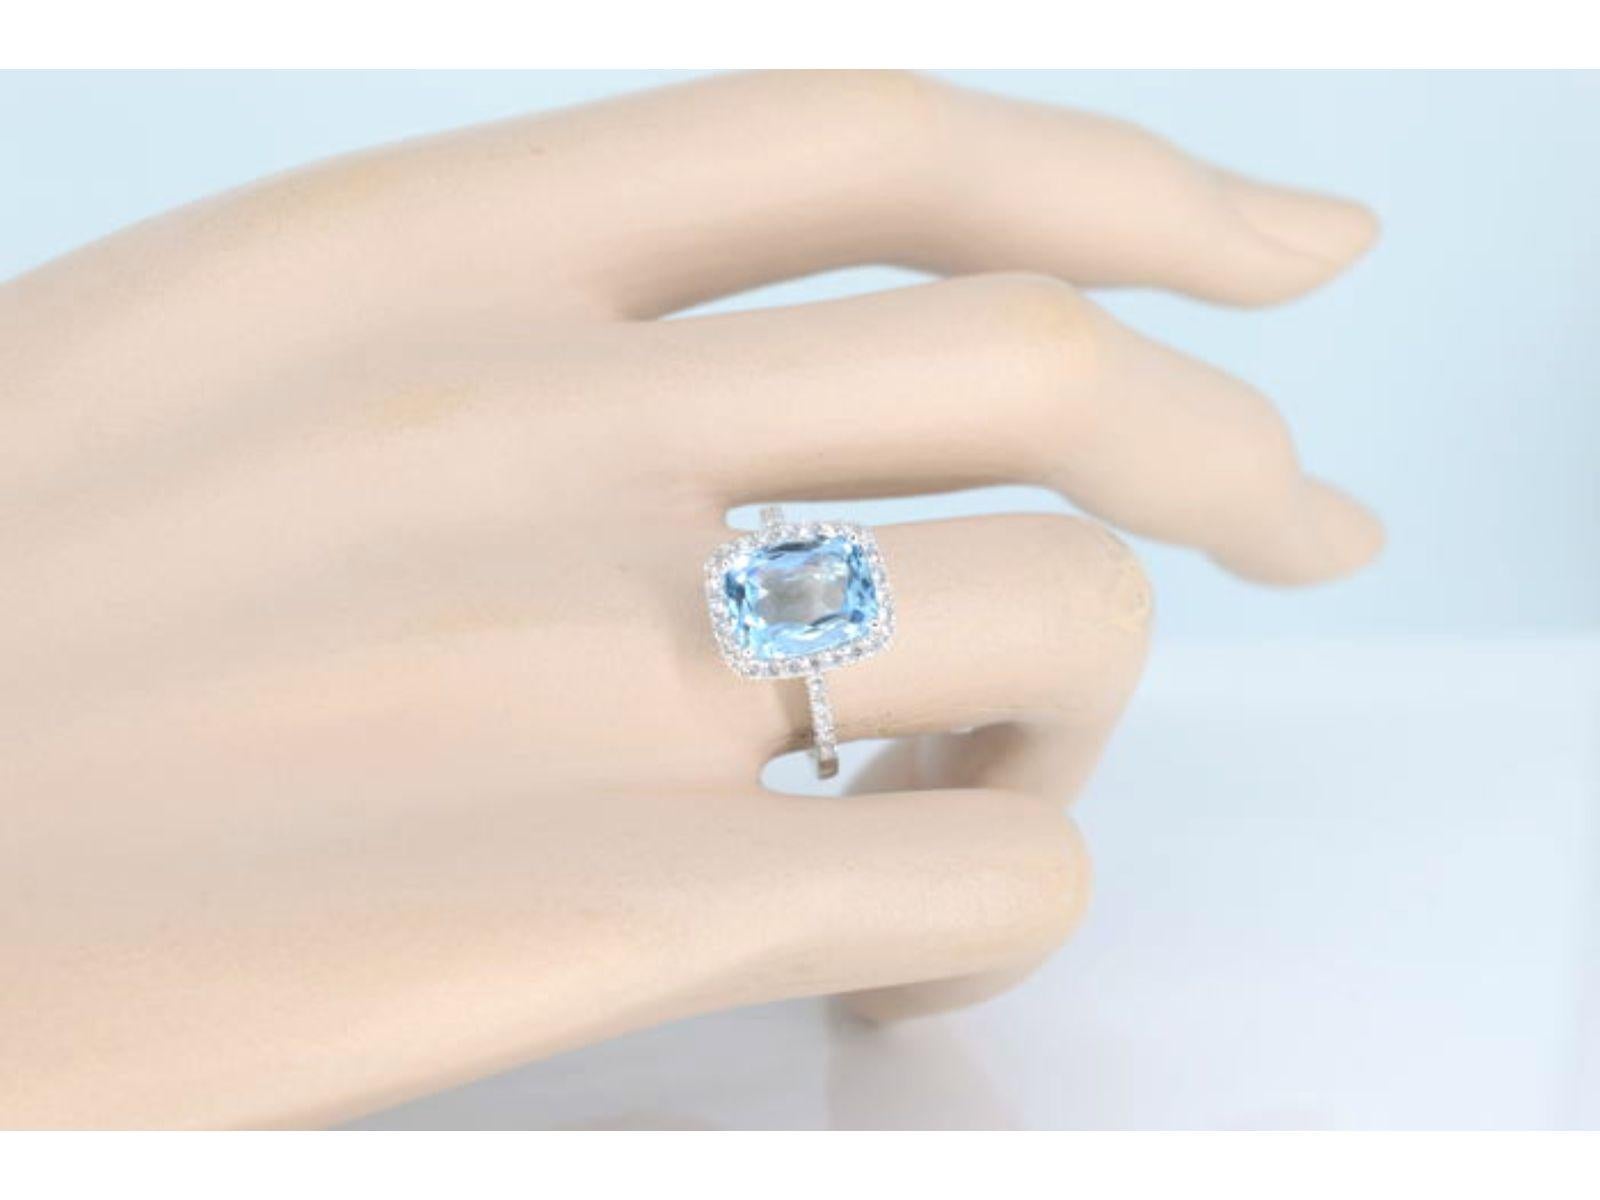 Introducing an exquisite ring that combines the brilliance of diamonds with the vibrant hue of topaz. The ring features naturally shiny diamonds, weighing a total of 0.30 carats. The diamonds are cut in a brilliant style, providing maximum sparkle